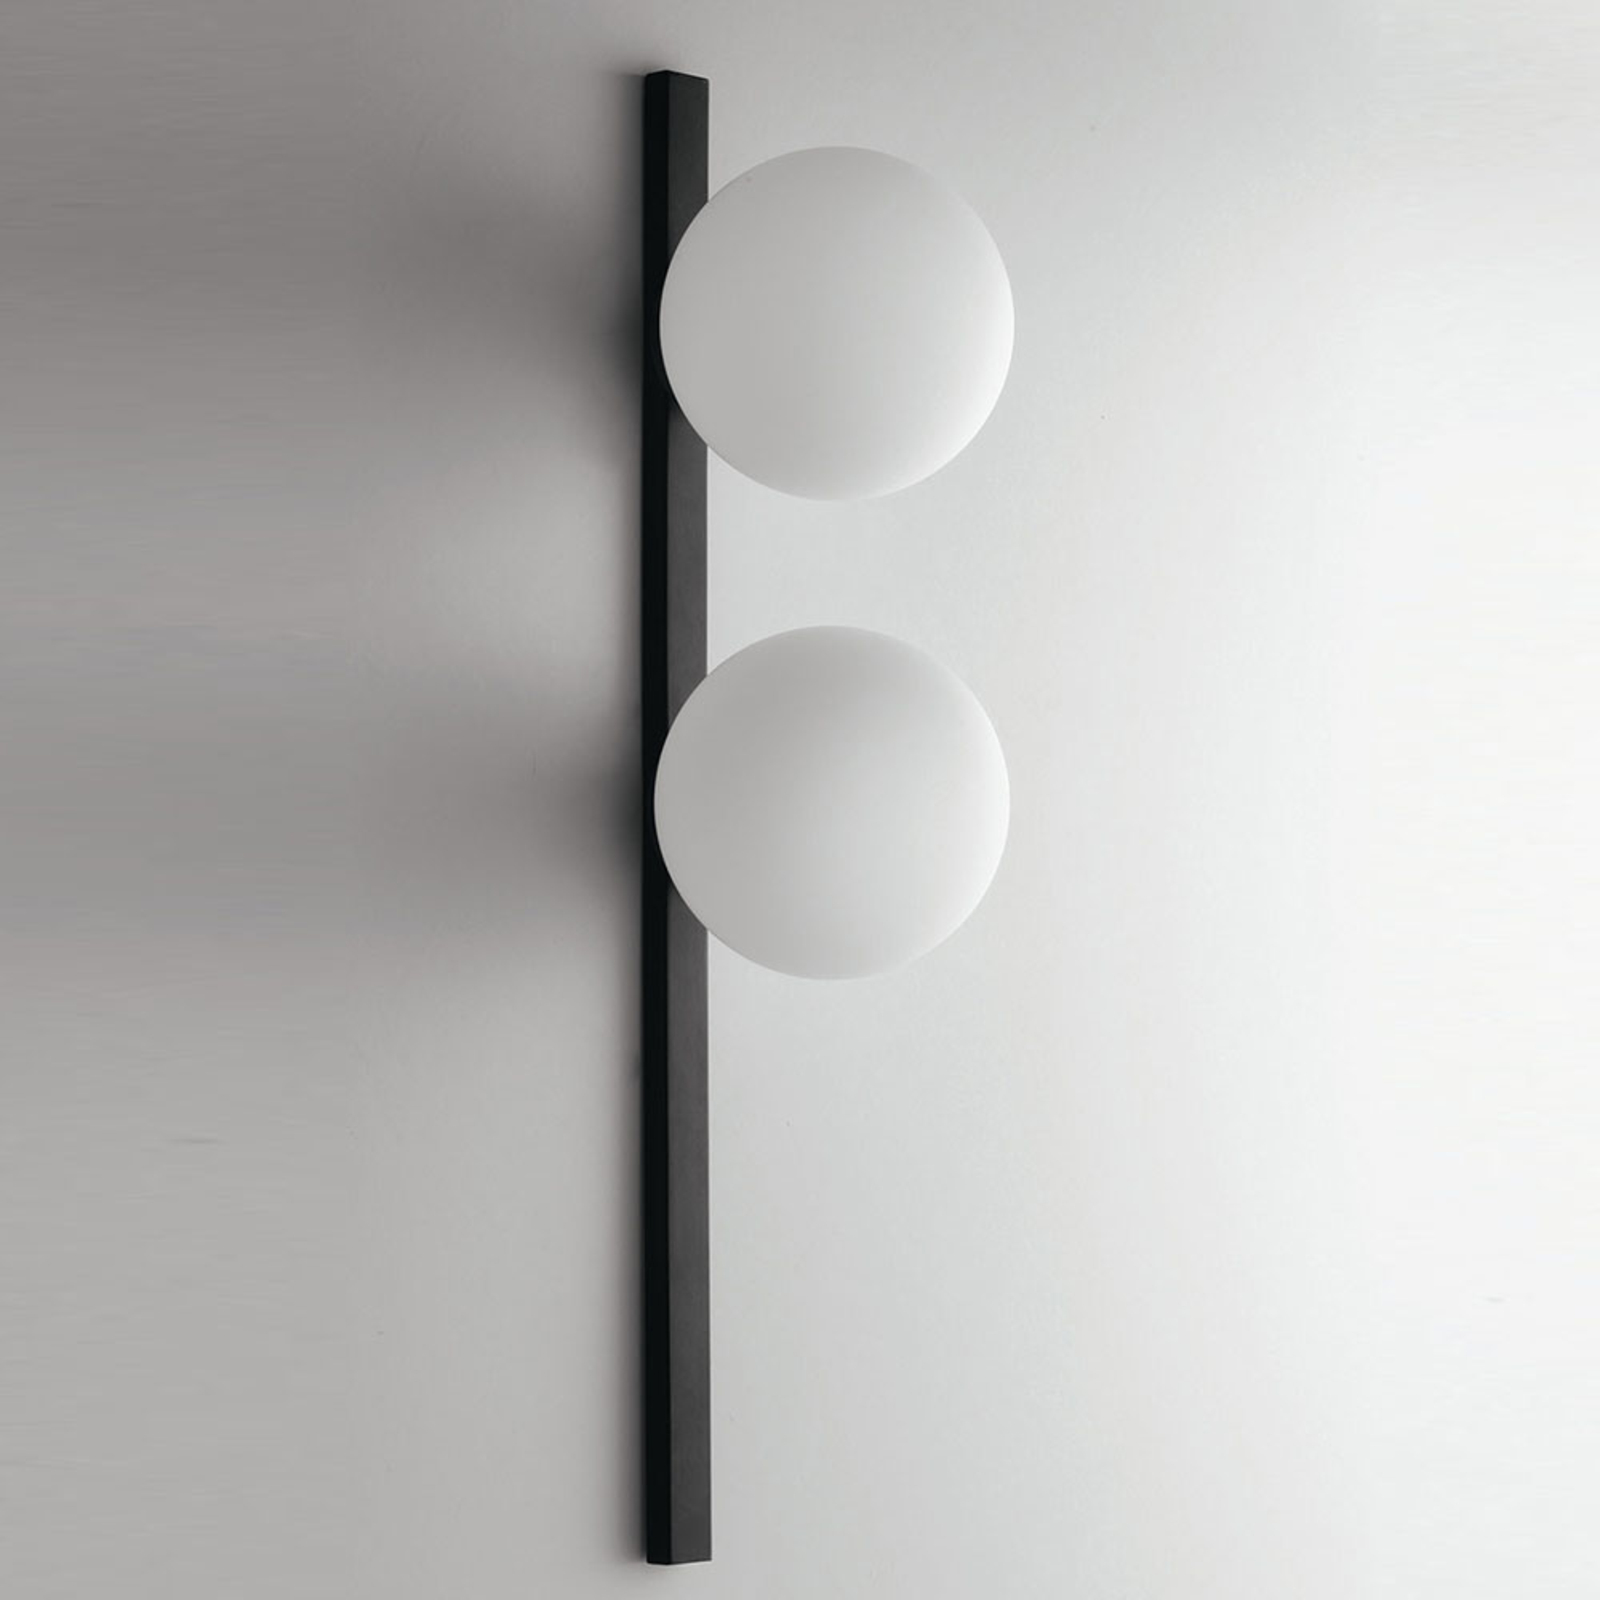 Enoire wall light in black and white, 2-bulb